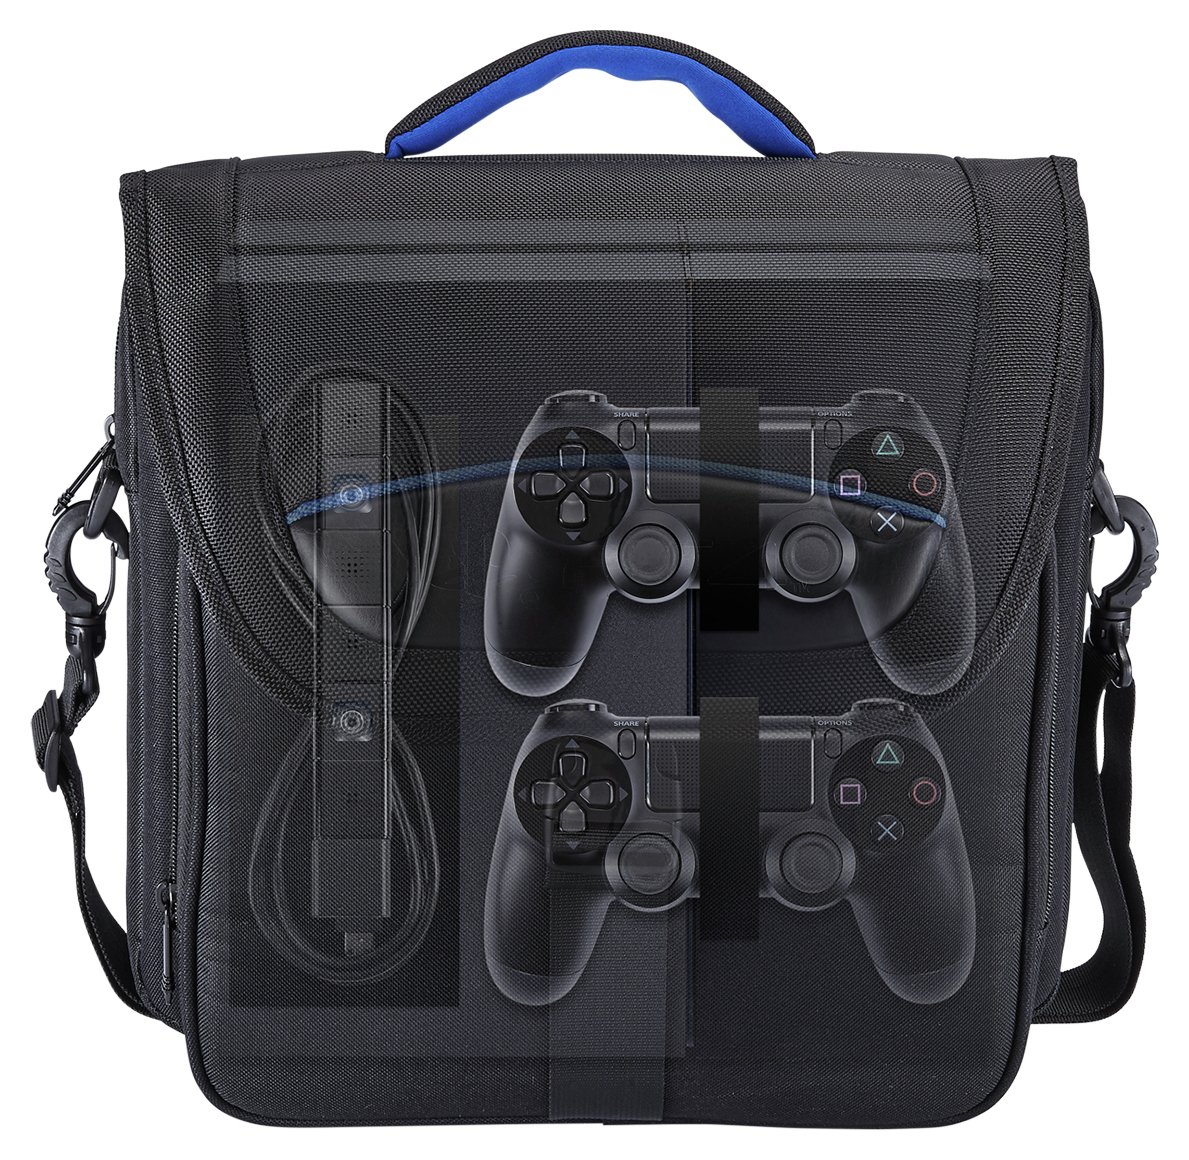 PS4 Official Licensed Console Carrying Case Reviews